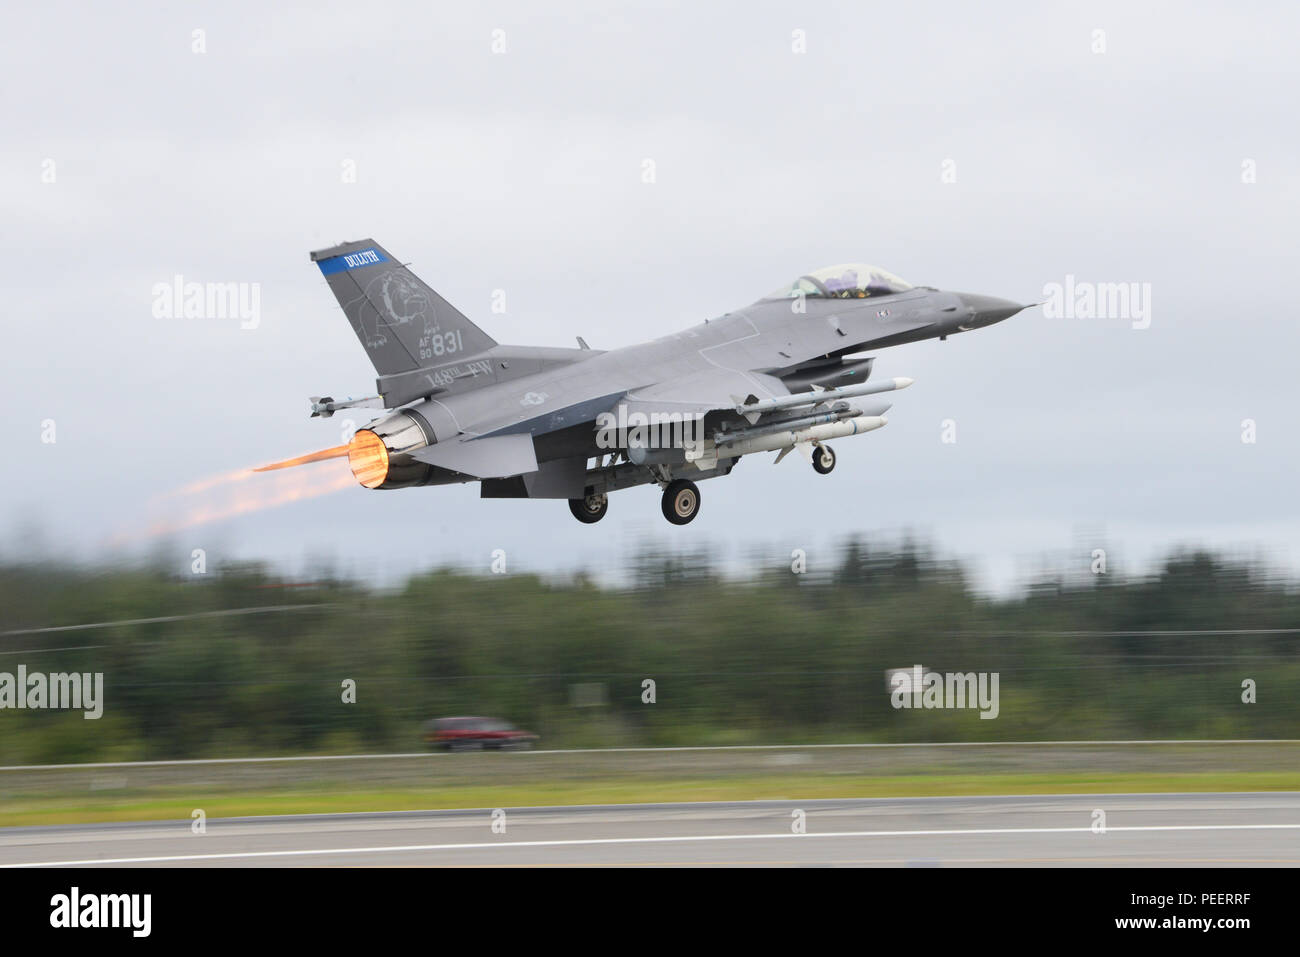 A U.S. Air Force F-16 Fighting Falcon assigned to the 179th Fighter Squadron, Duluth Air National Guard, Minn., takes off from Eielson Air Force Base, Alaska, Aug. 10, 2015, during Red Flag-Alaska (RF-A) 15-3. RF-A is a series of Pacific Air Forces commander-directed field training exercises for U.S. and partner nation forces, providing combined offensive counter-air, interdiction, close air support and large force employment training in a simulated combat environment. (U.S. Air Force photo by Senior Airman Ashley Nicole Taylor/Released) Stock Photo